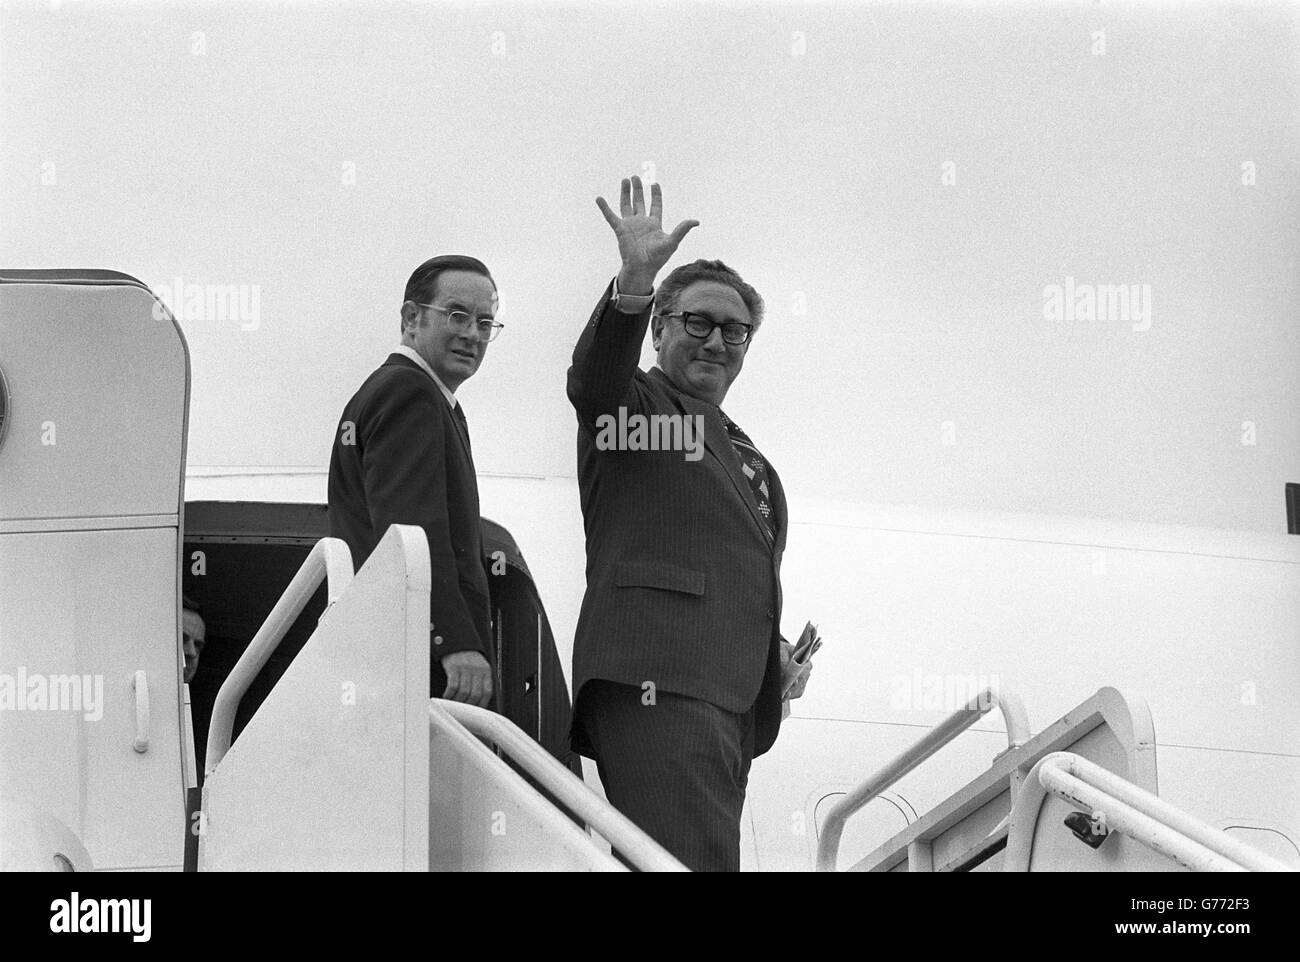 American Secretary of State, Dr Henry Kissinger bids farewell to Britain from the steps of his aircraft before leaving London's Heathrow airport today at the end of a two-day visit during which he attended a Ministerial meeting of the Treaty Organisation (CENTO) Stock Photo